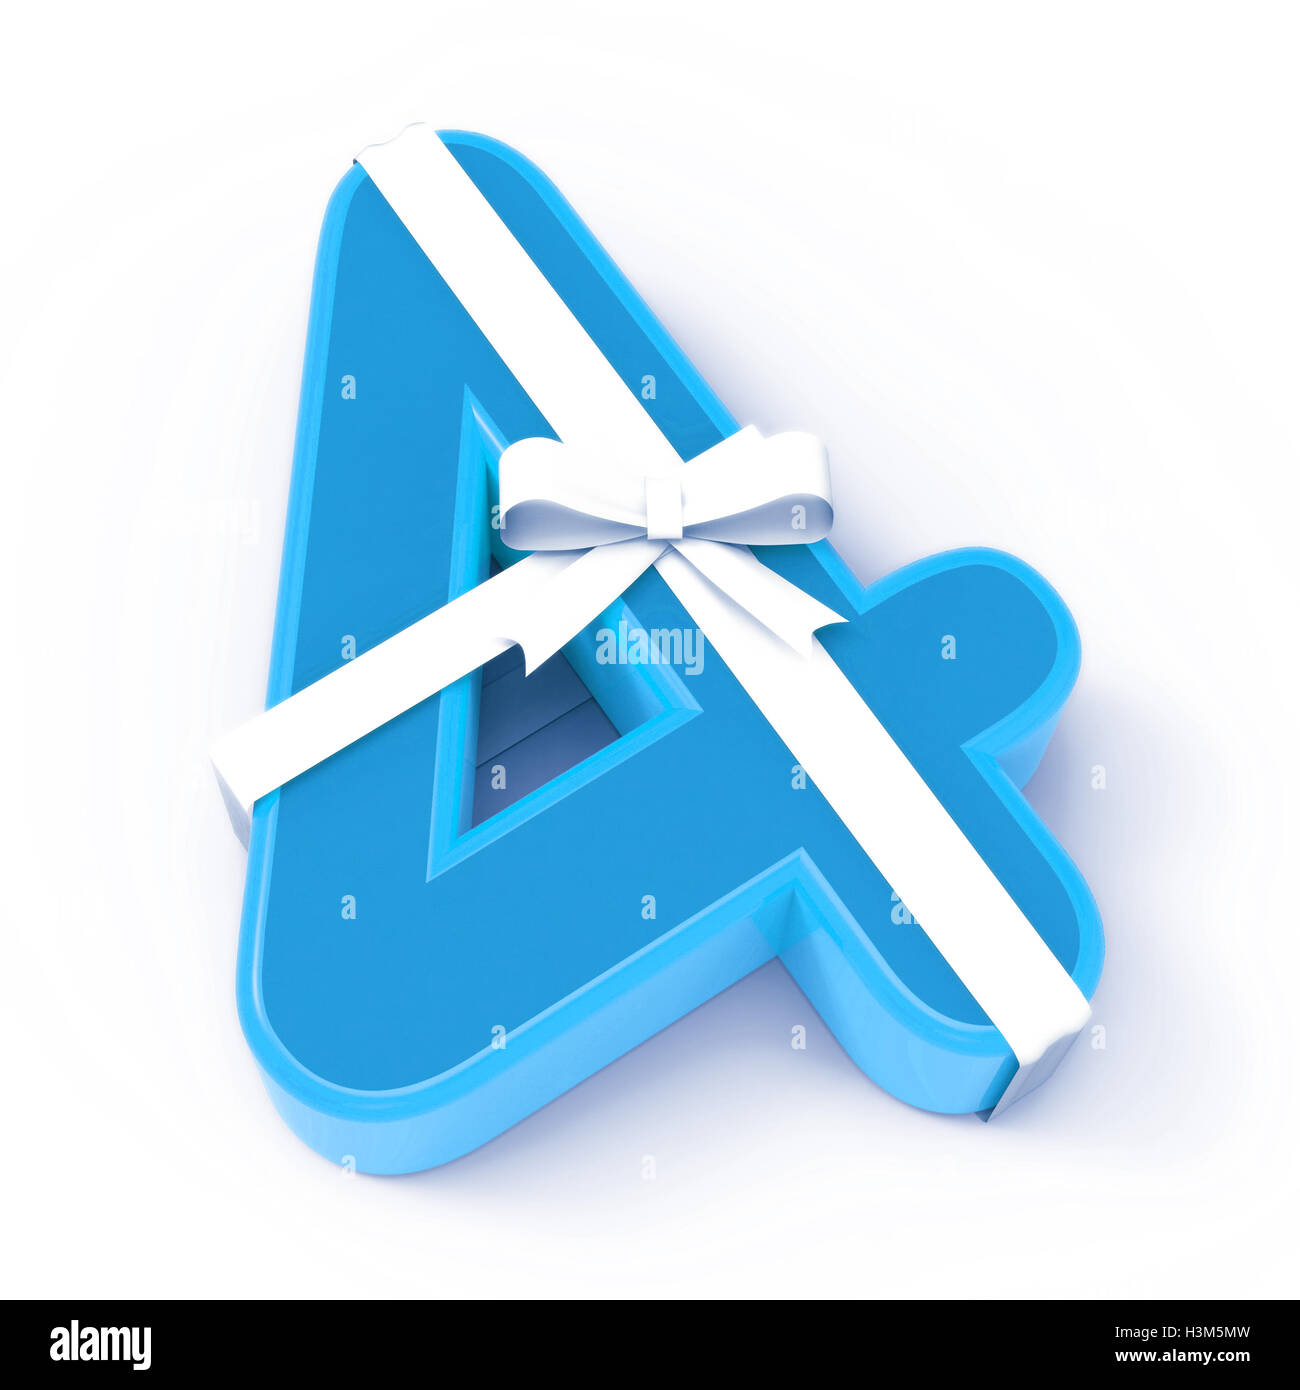 Number Four With Ribbon Displays Wishing Happiness Or Celebratin Stock Photo